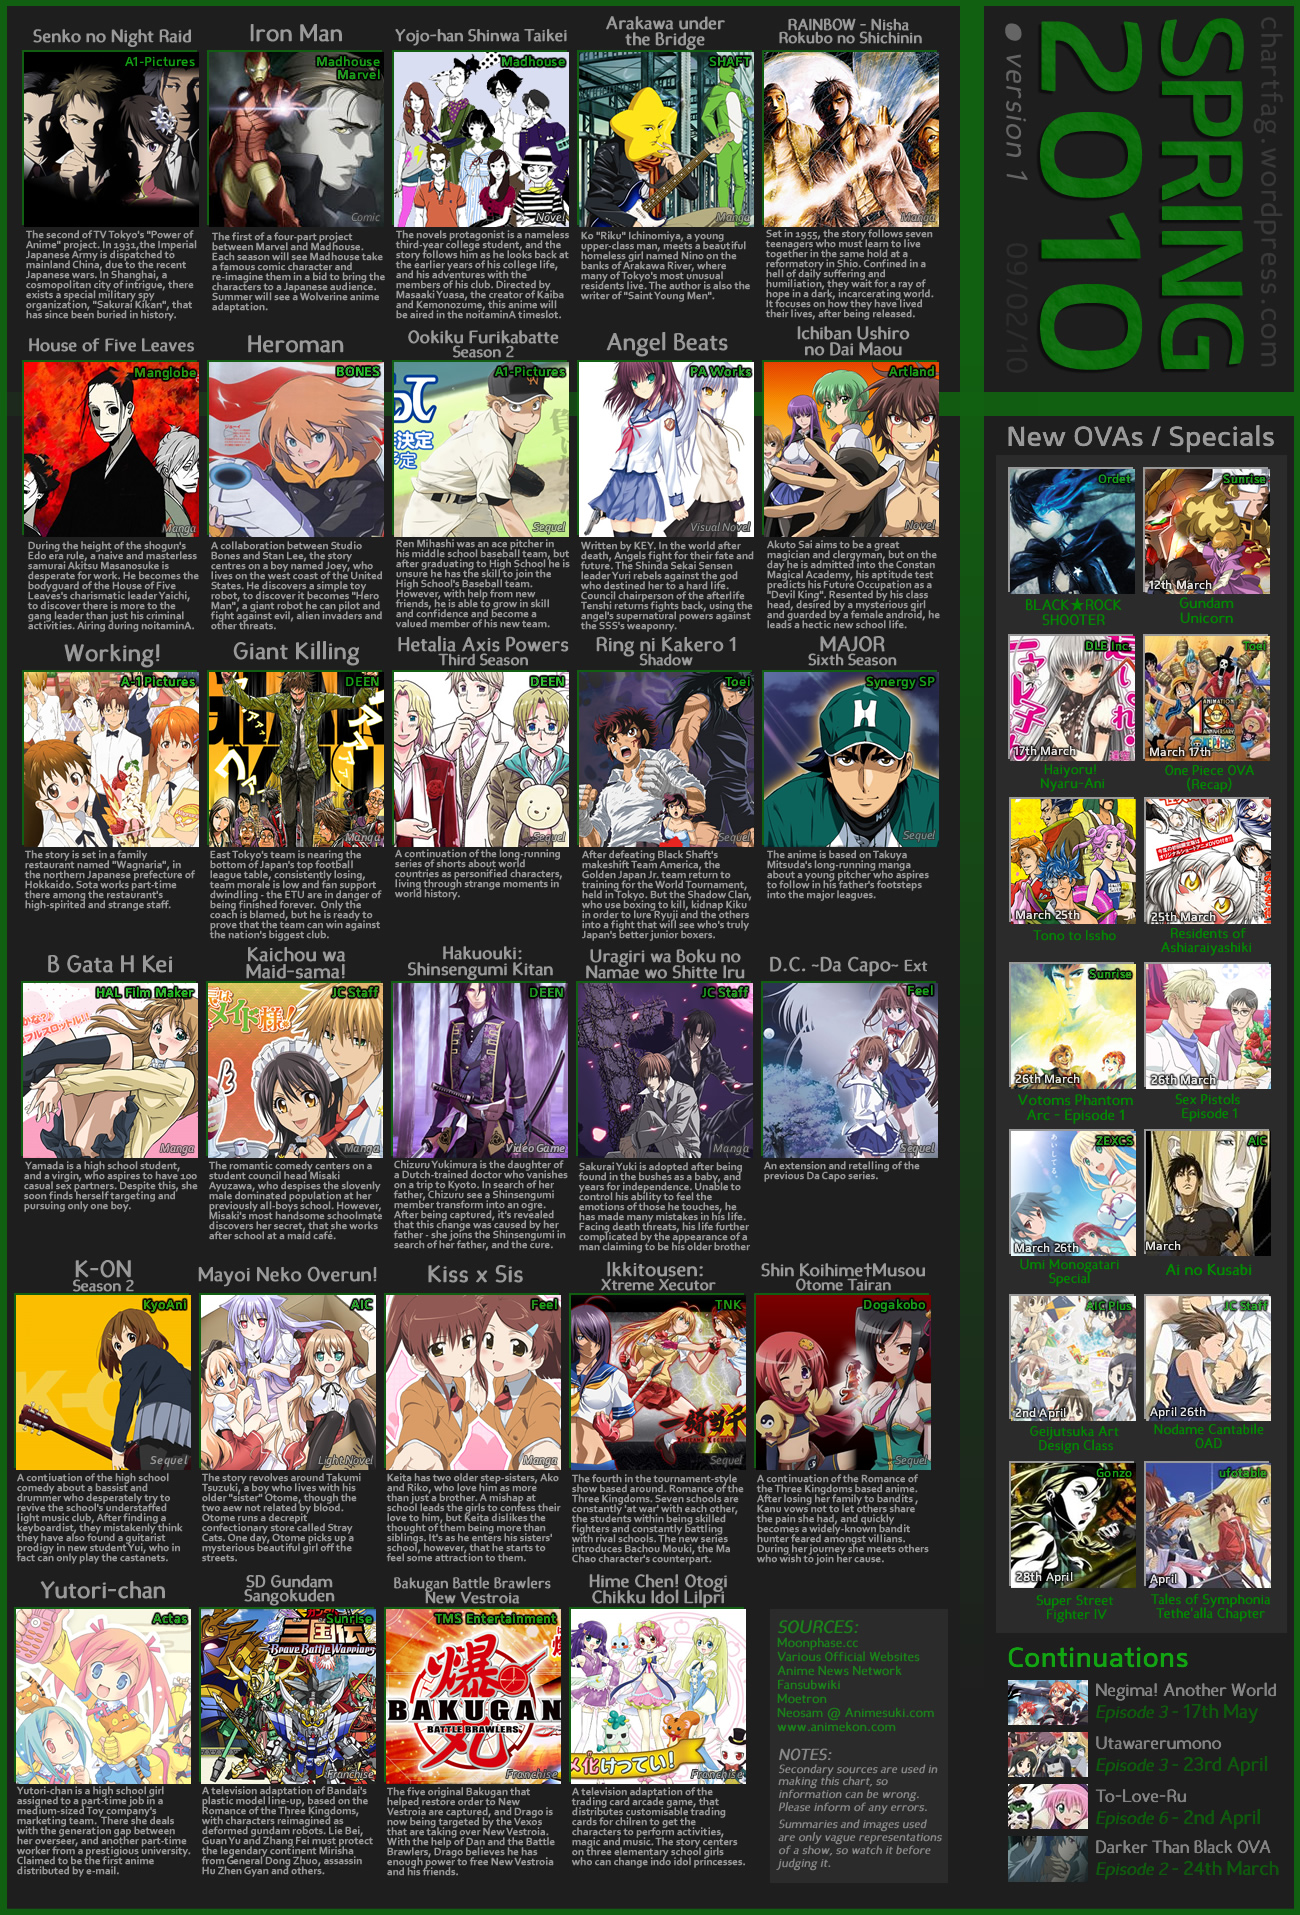 Spring 2010 Anime Chart - Television